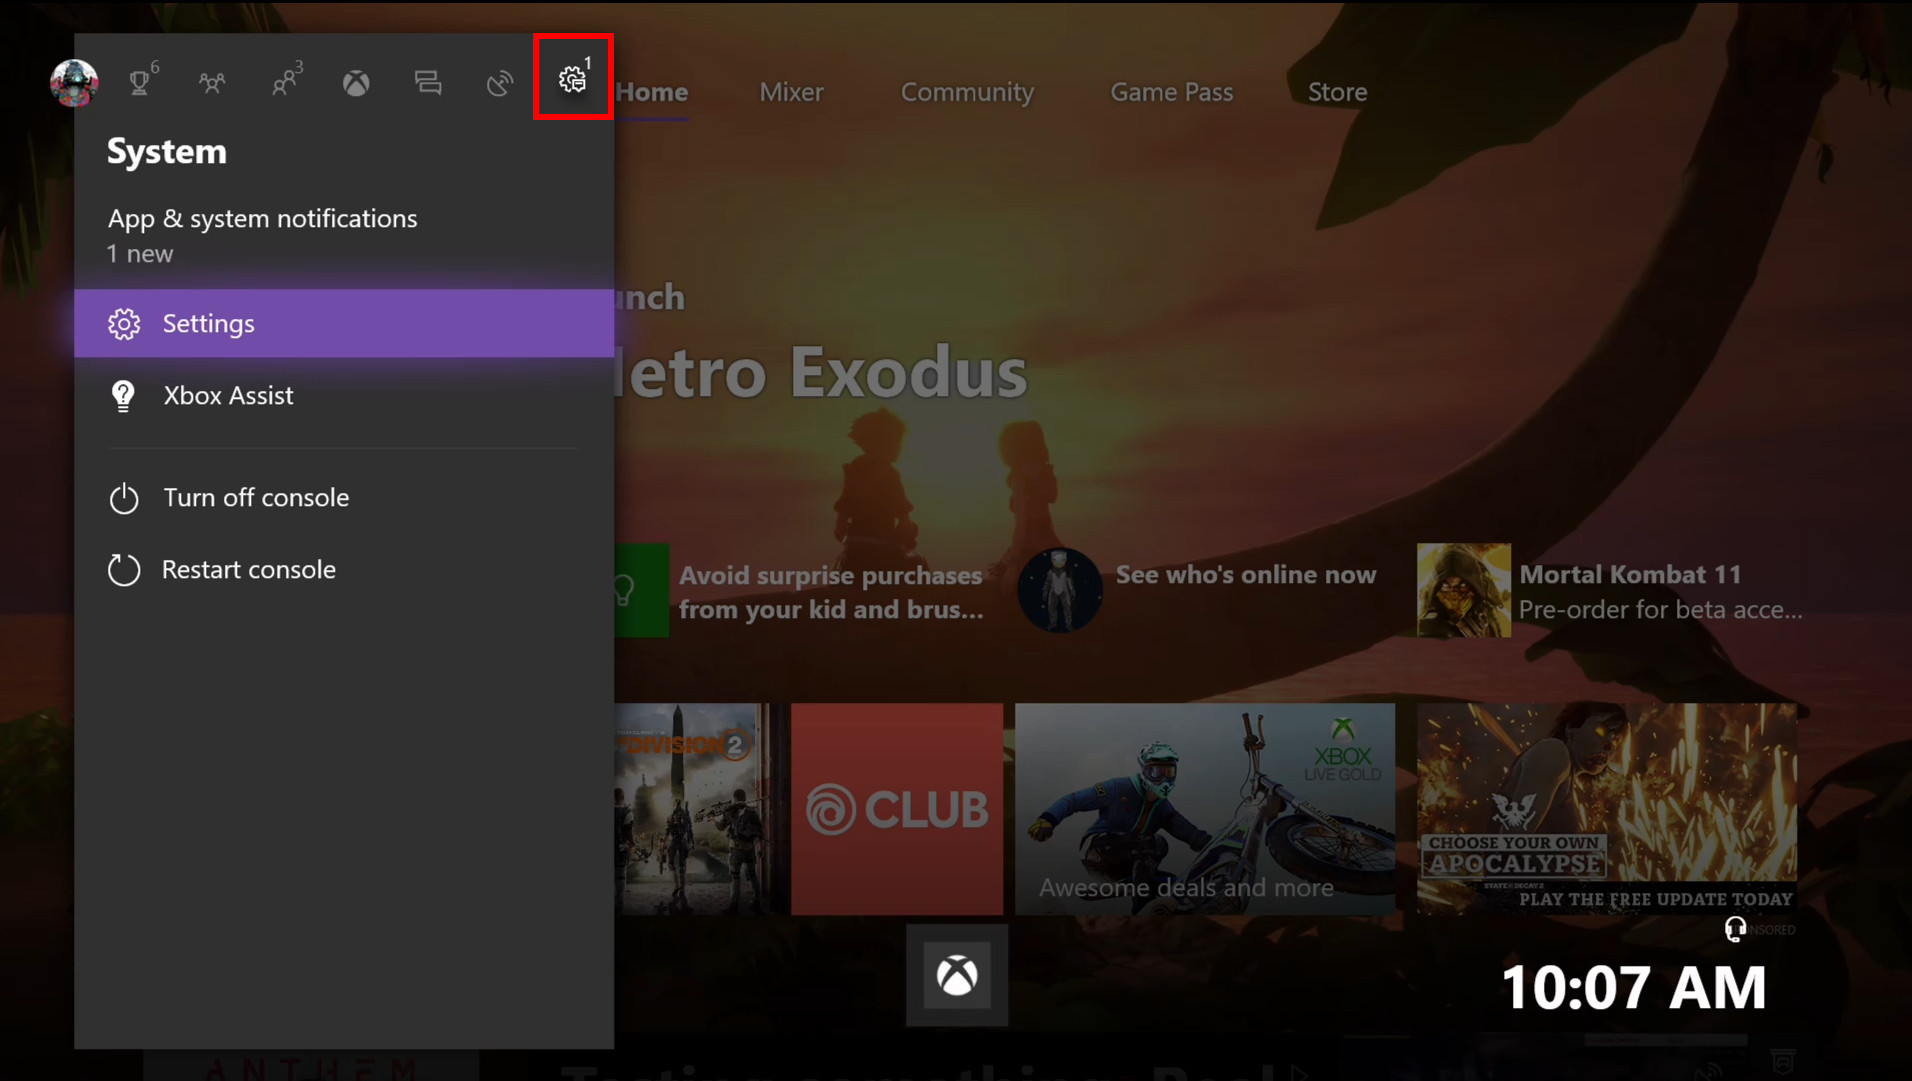 Zelfrespect blauwe vinvis progressief How to stream the Xbox One to Windows 10 locally and over the internet